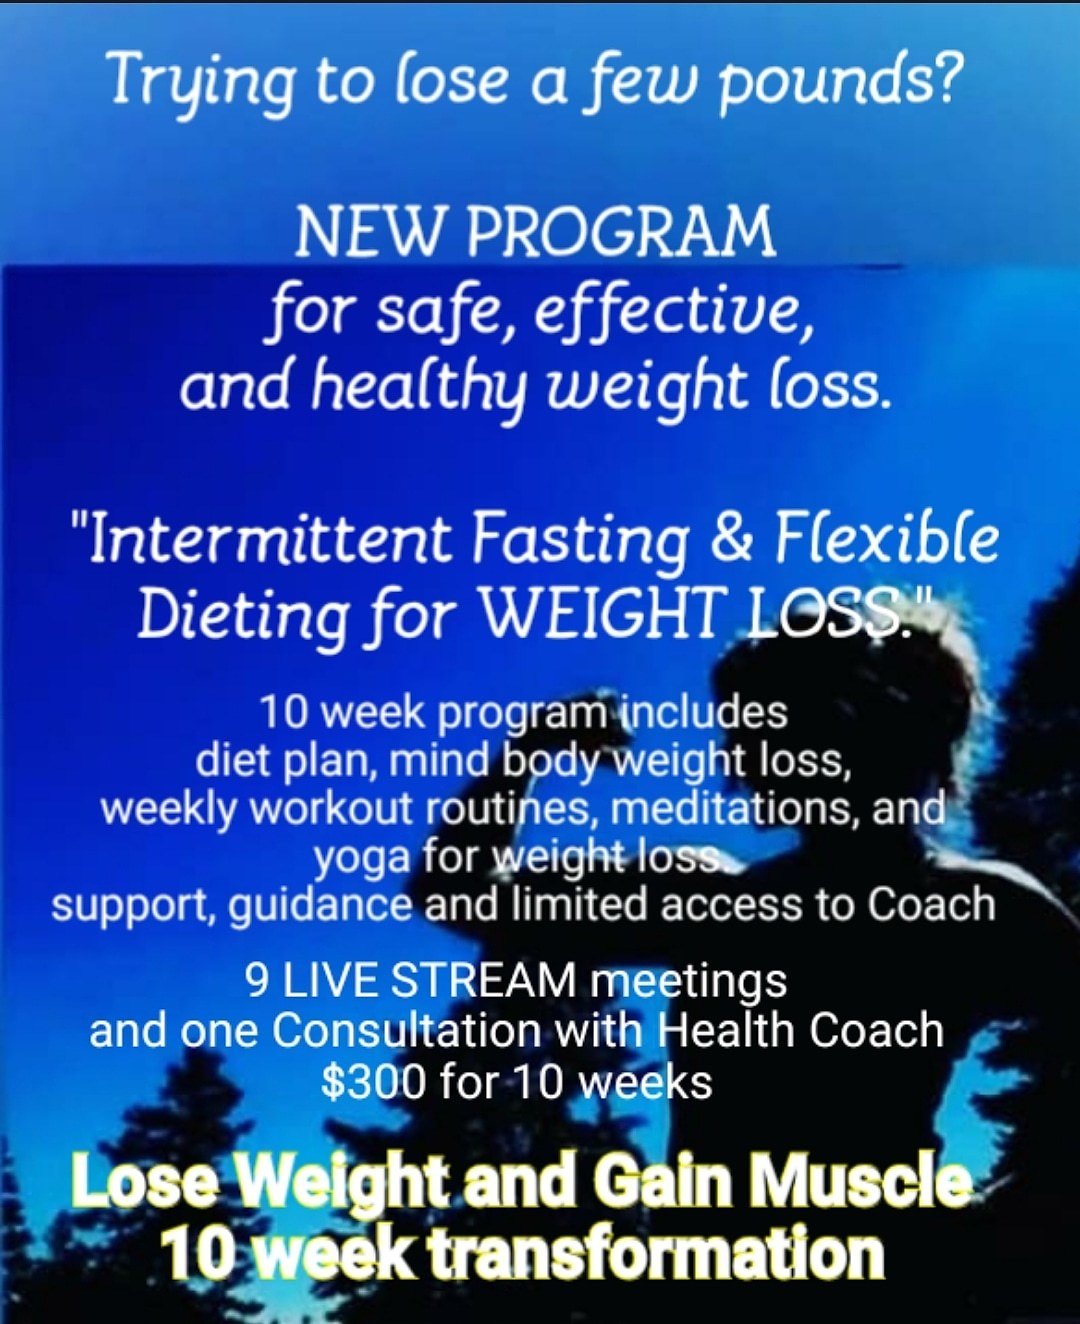 Healthy Weight Loss 10 Week Intermittent Fasting Flexible Dieting